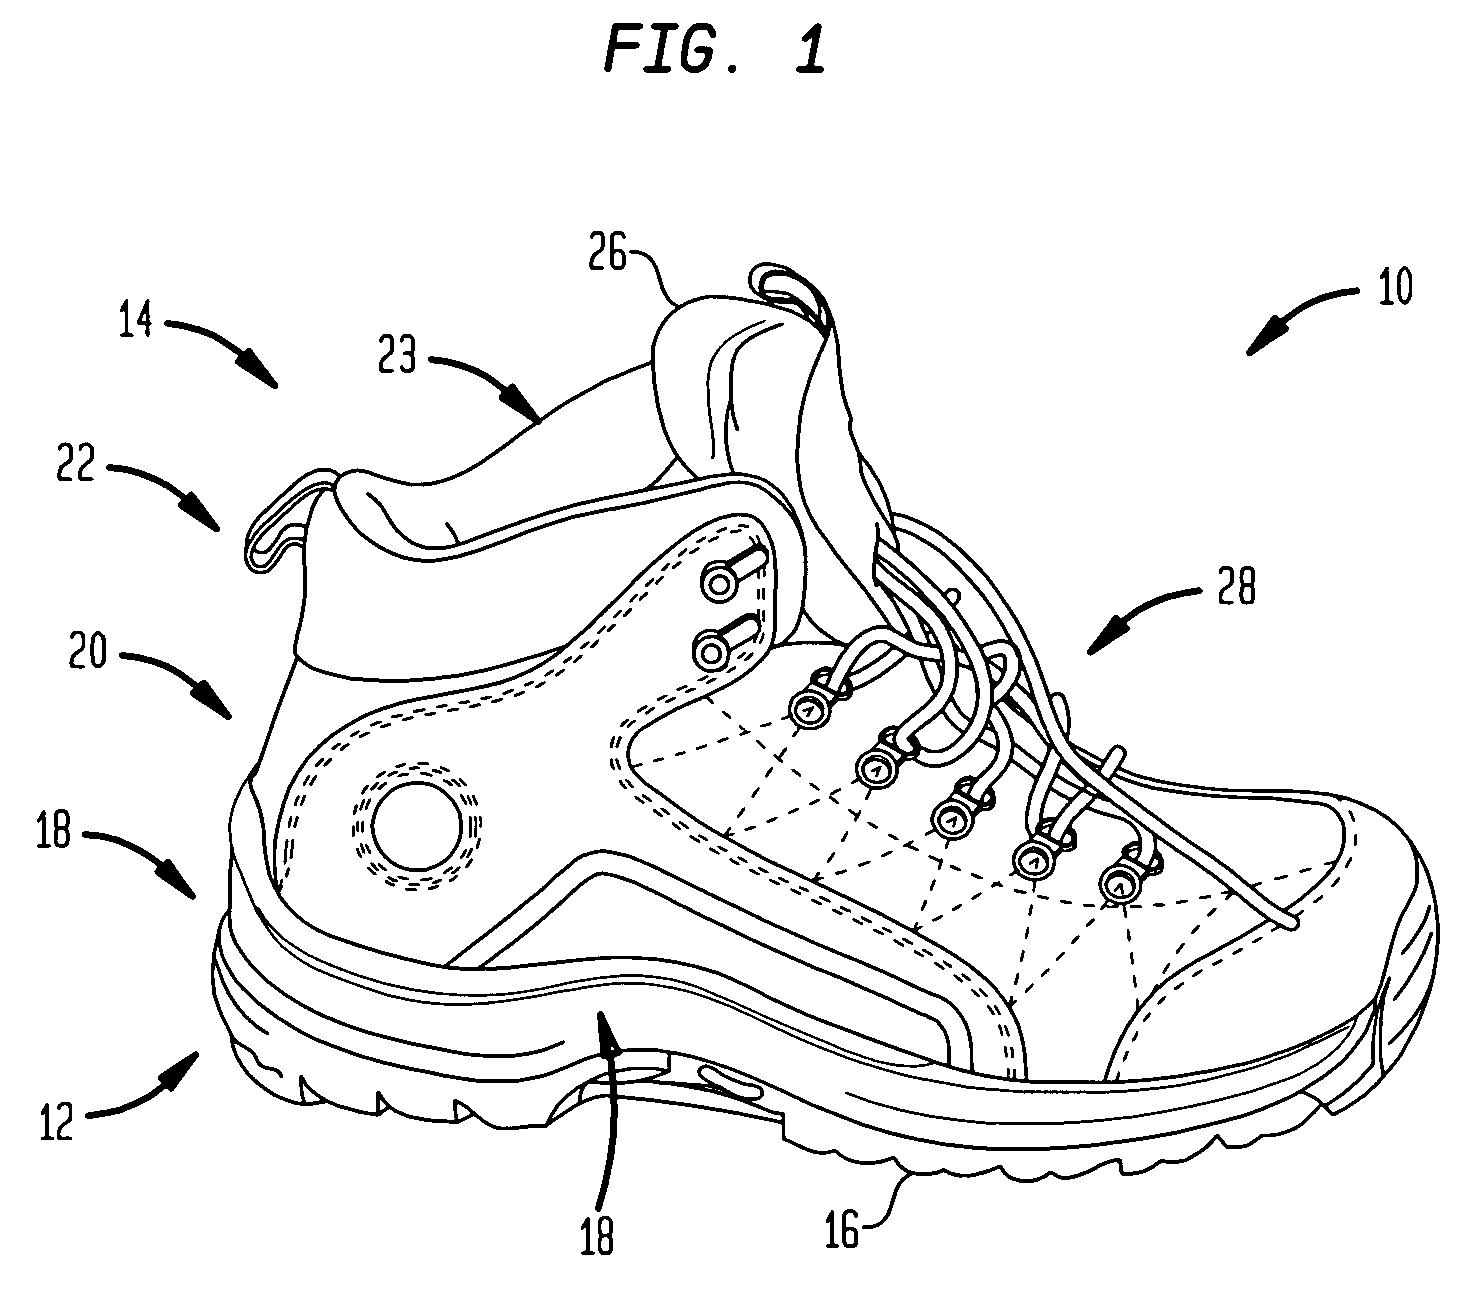 Removable or reversible lining for footwear